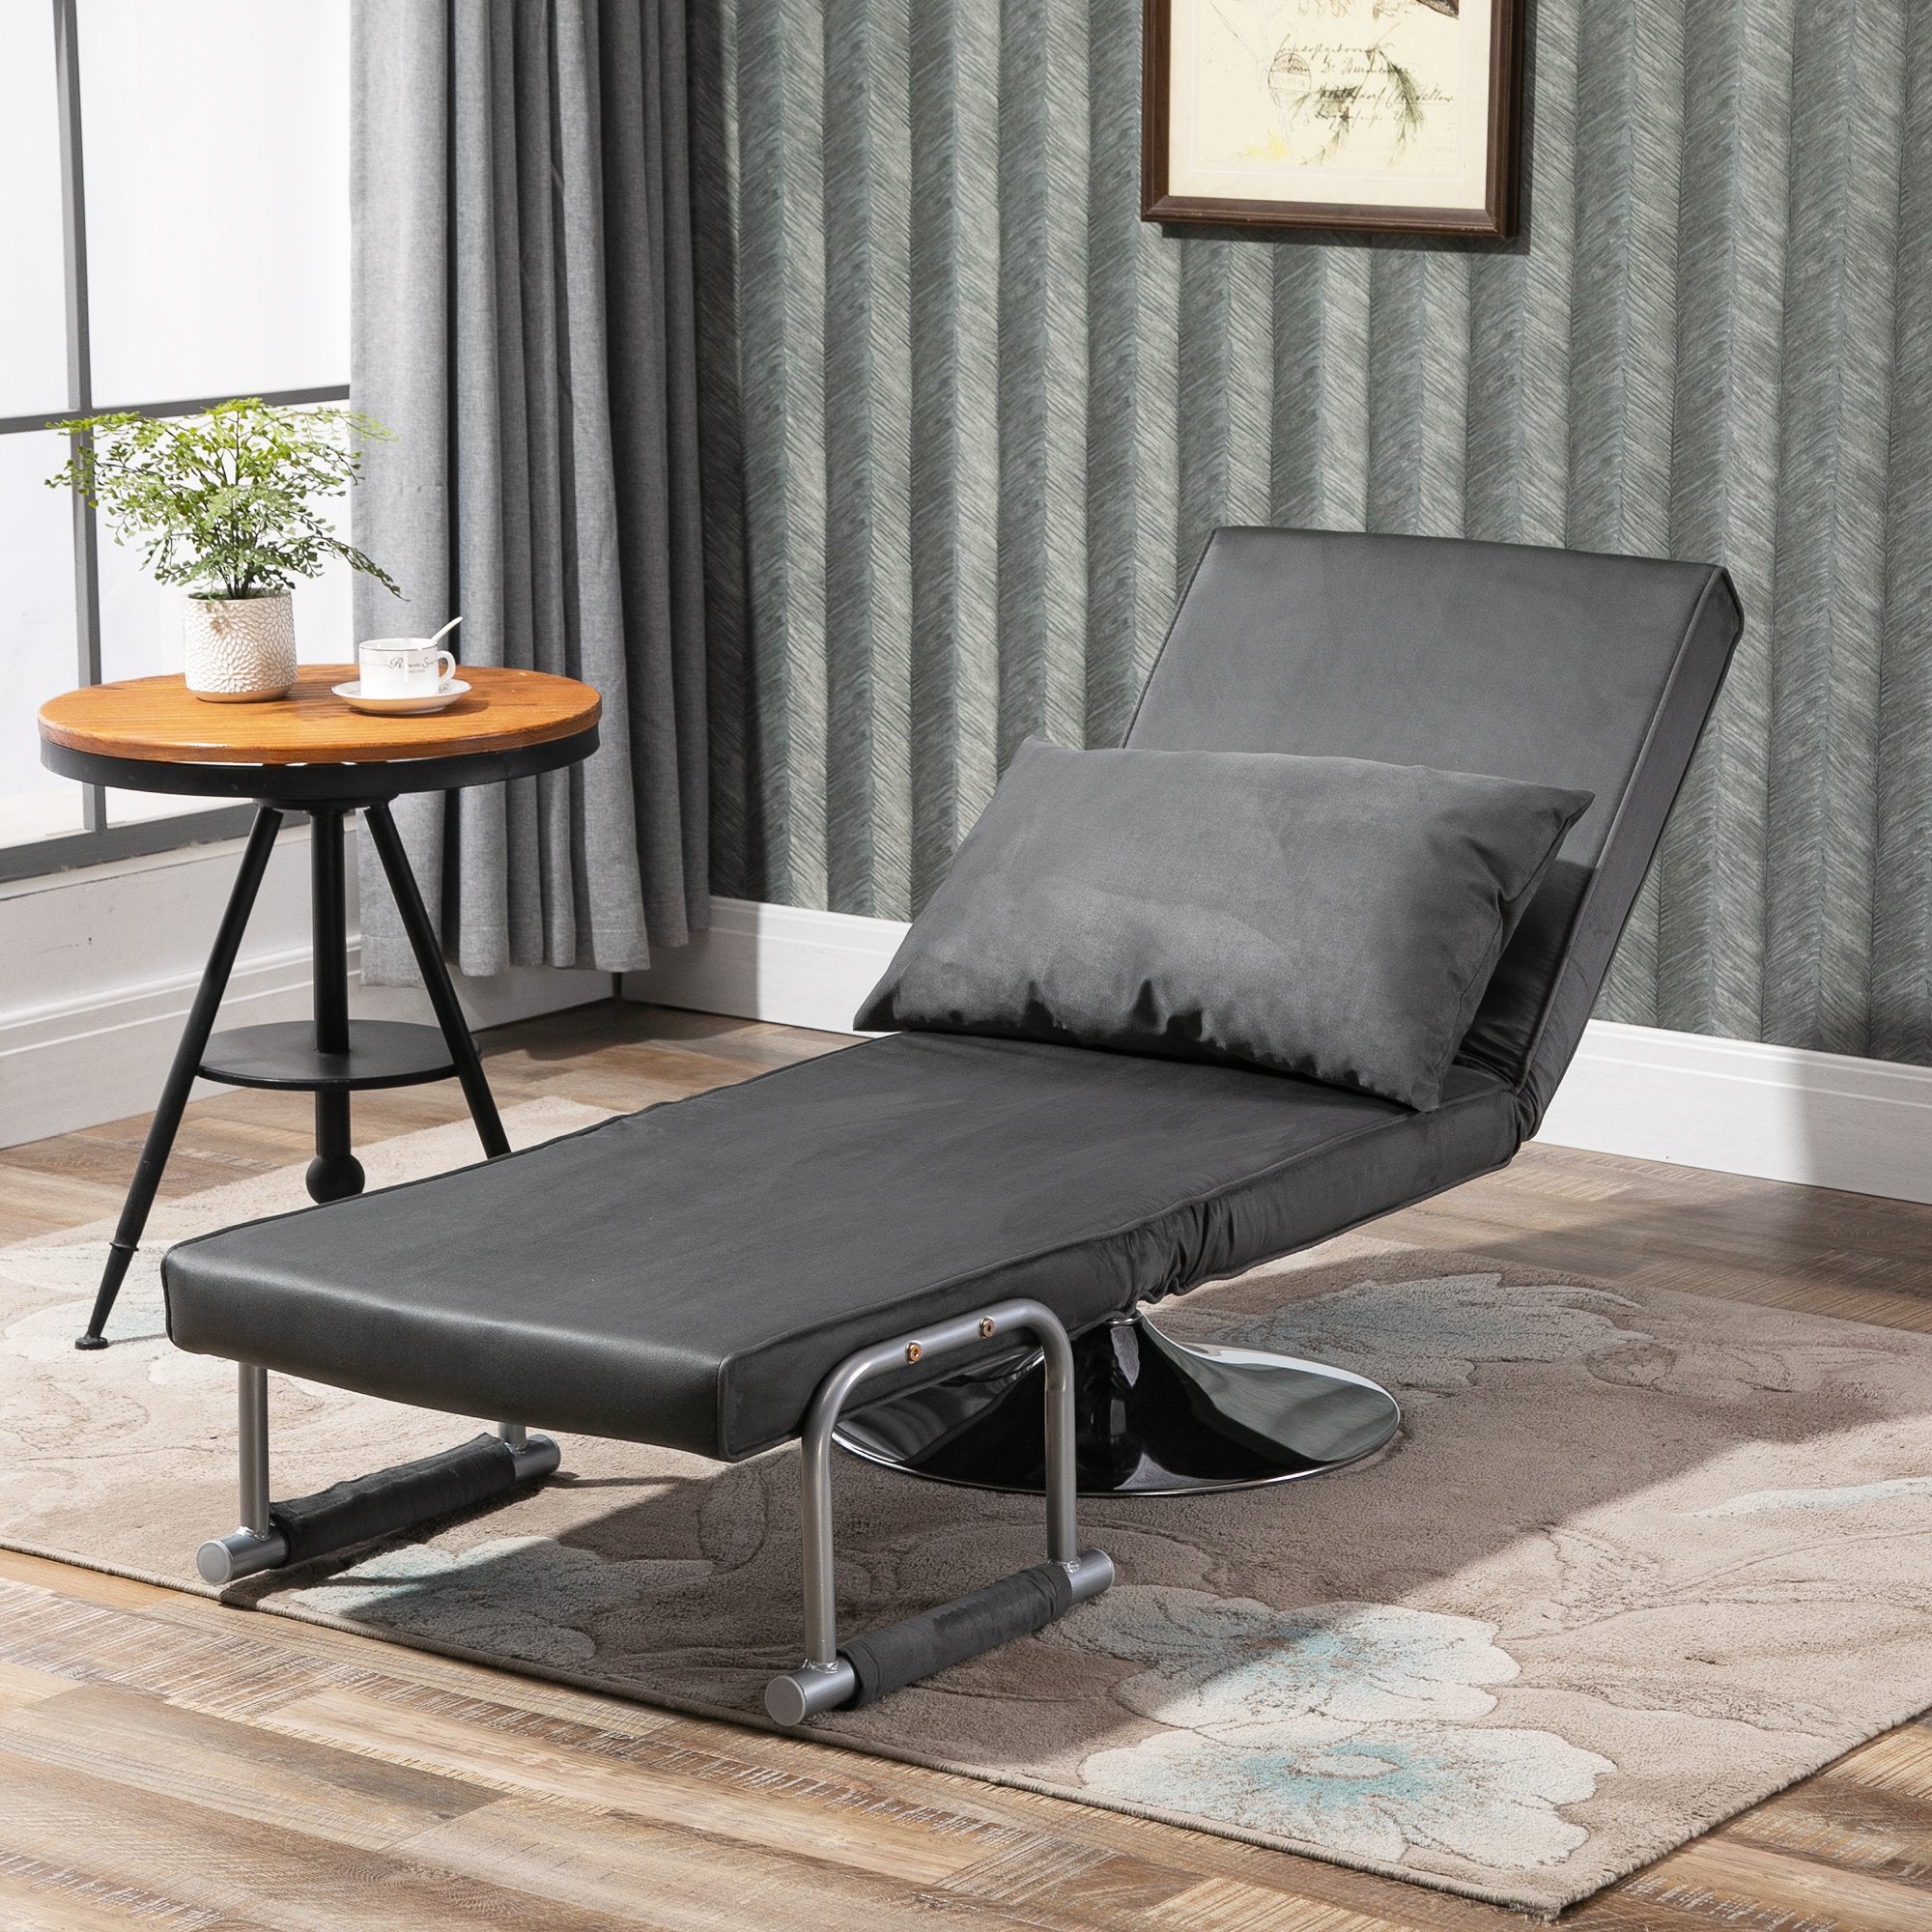 3-N-1 Sofa Chair Bed with 5-Position Adjustable Backrest and Seat Height